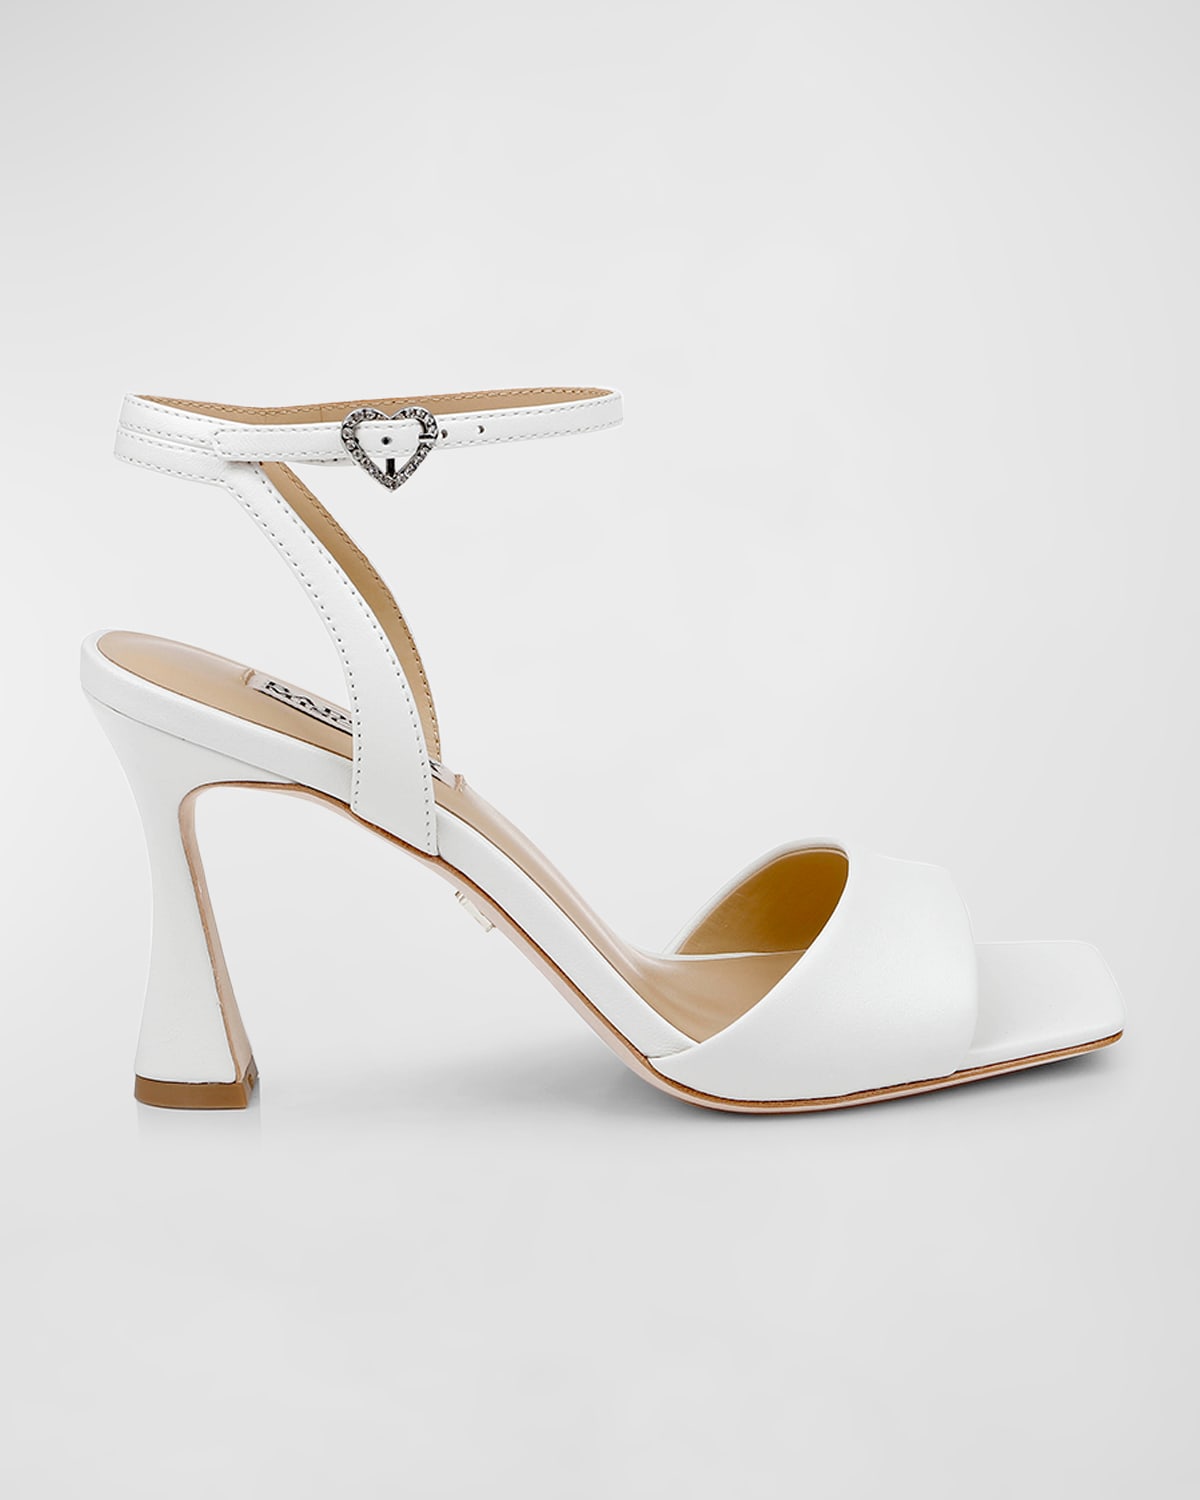 Cady Leather Crystal Heart Ankle-Strap Sandals